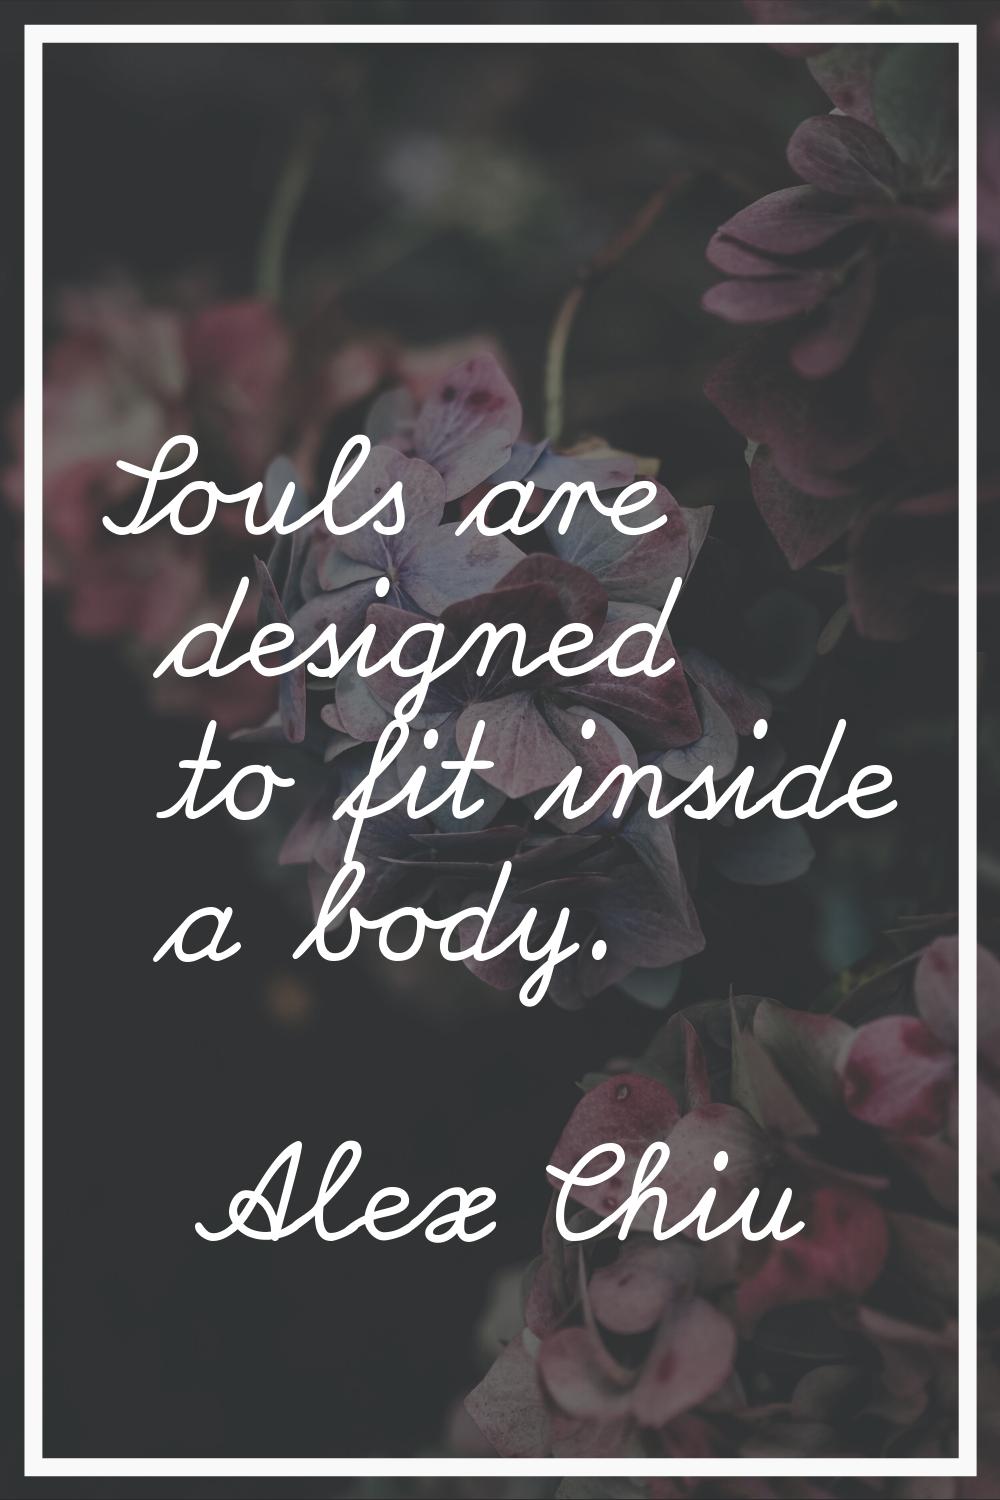 Souls are designed to fit inside a body.